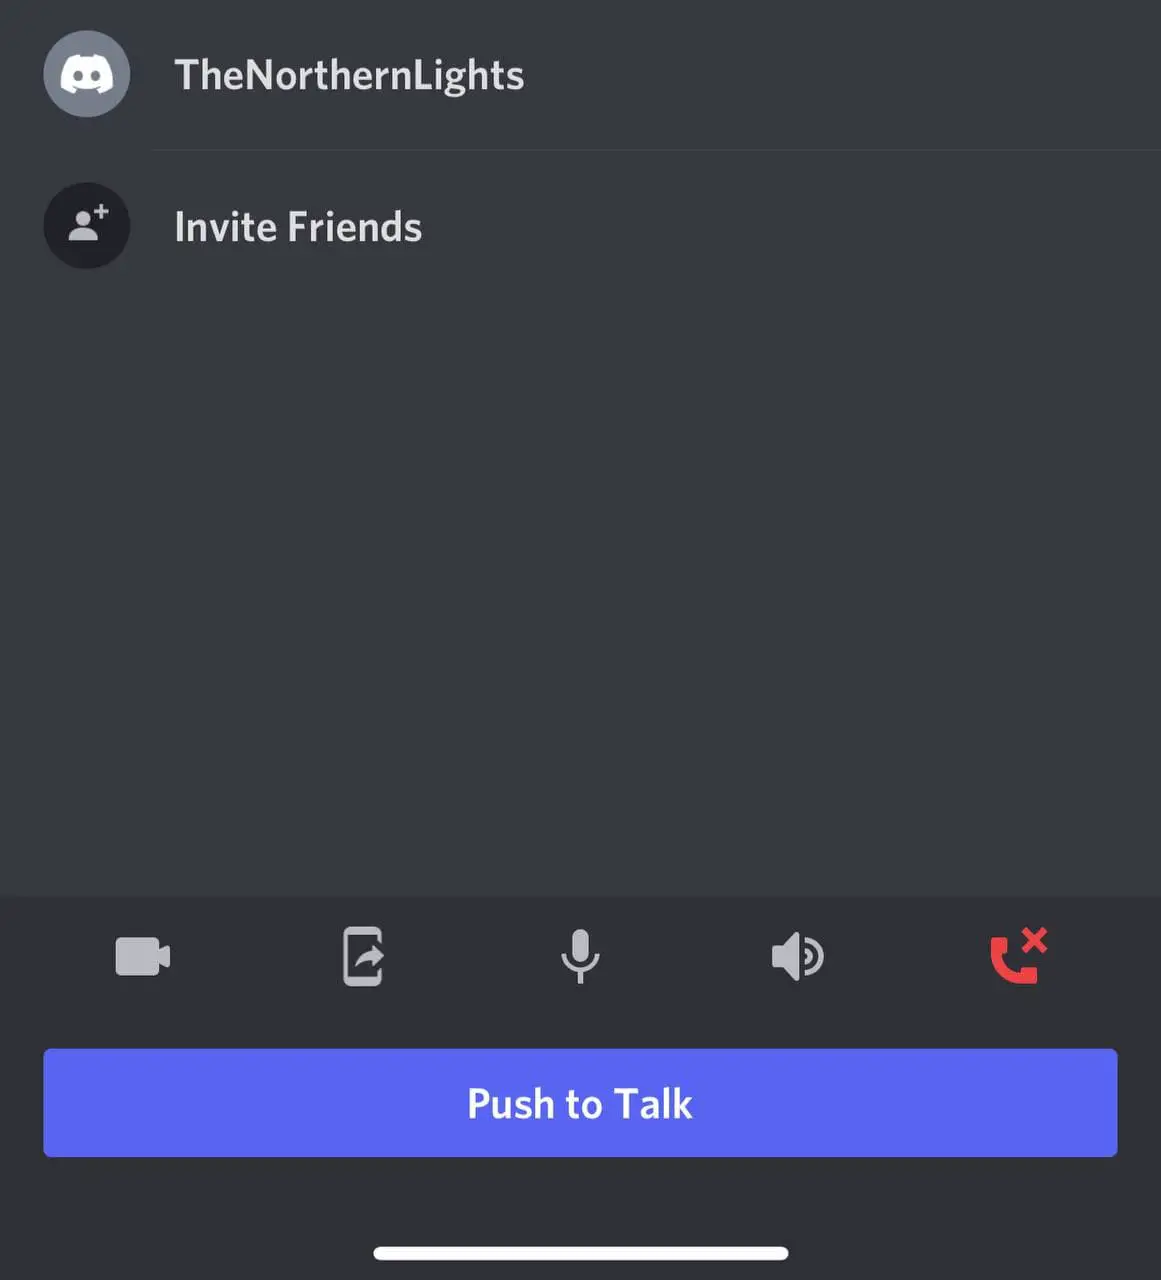 Are Discord Voice Calls Recorded Or Monitored?